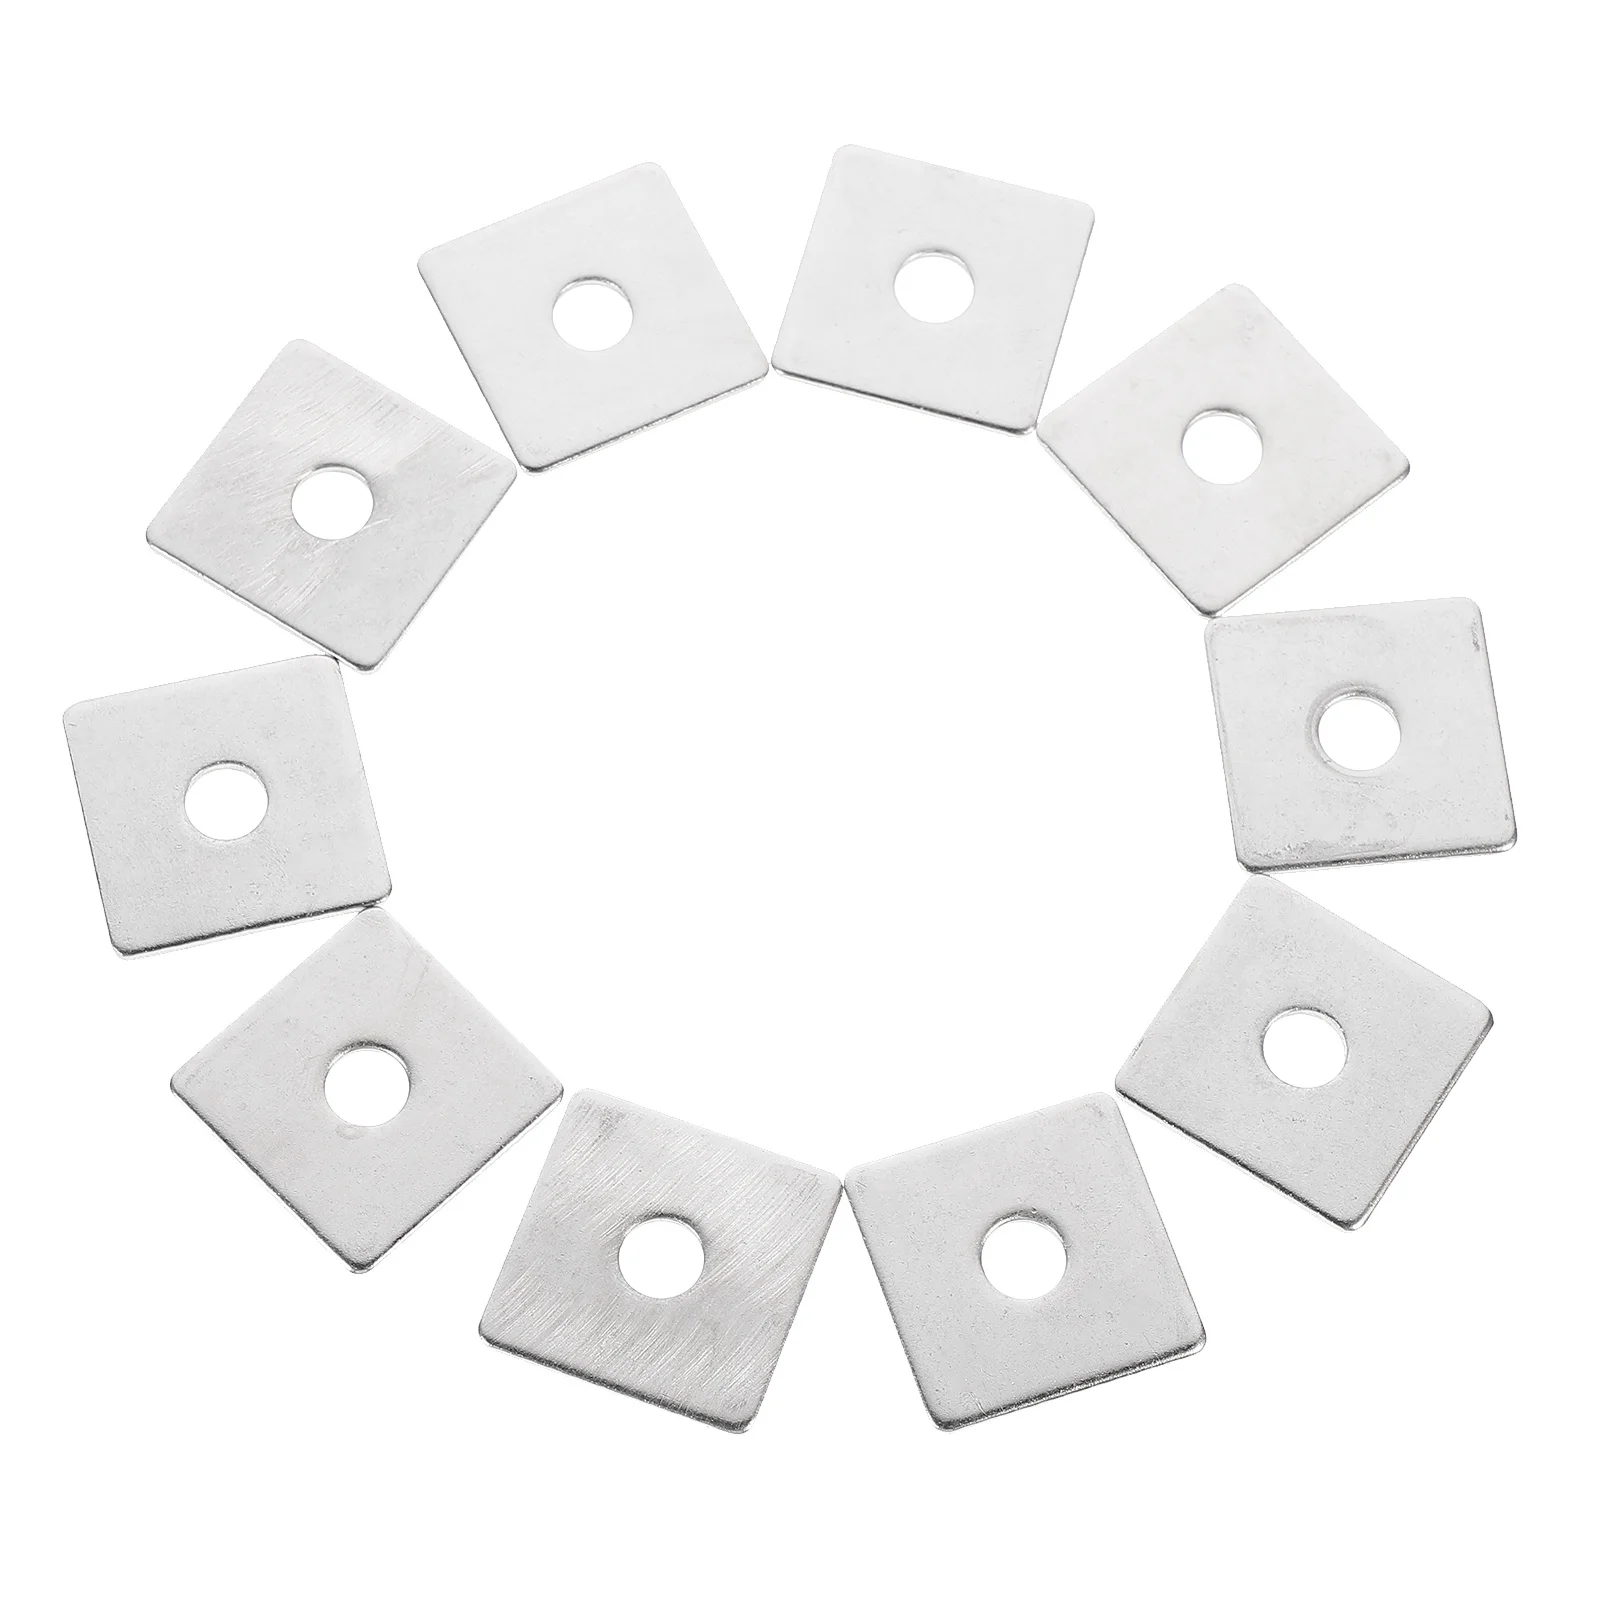 

10Pcs Square Flat Washers Stainless Steel Washers Sturdy Washers for Industry